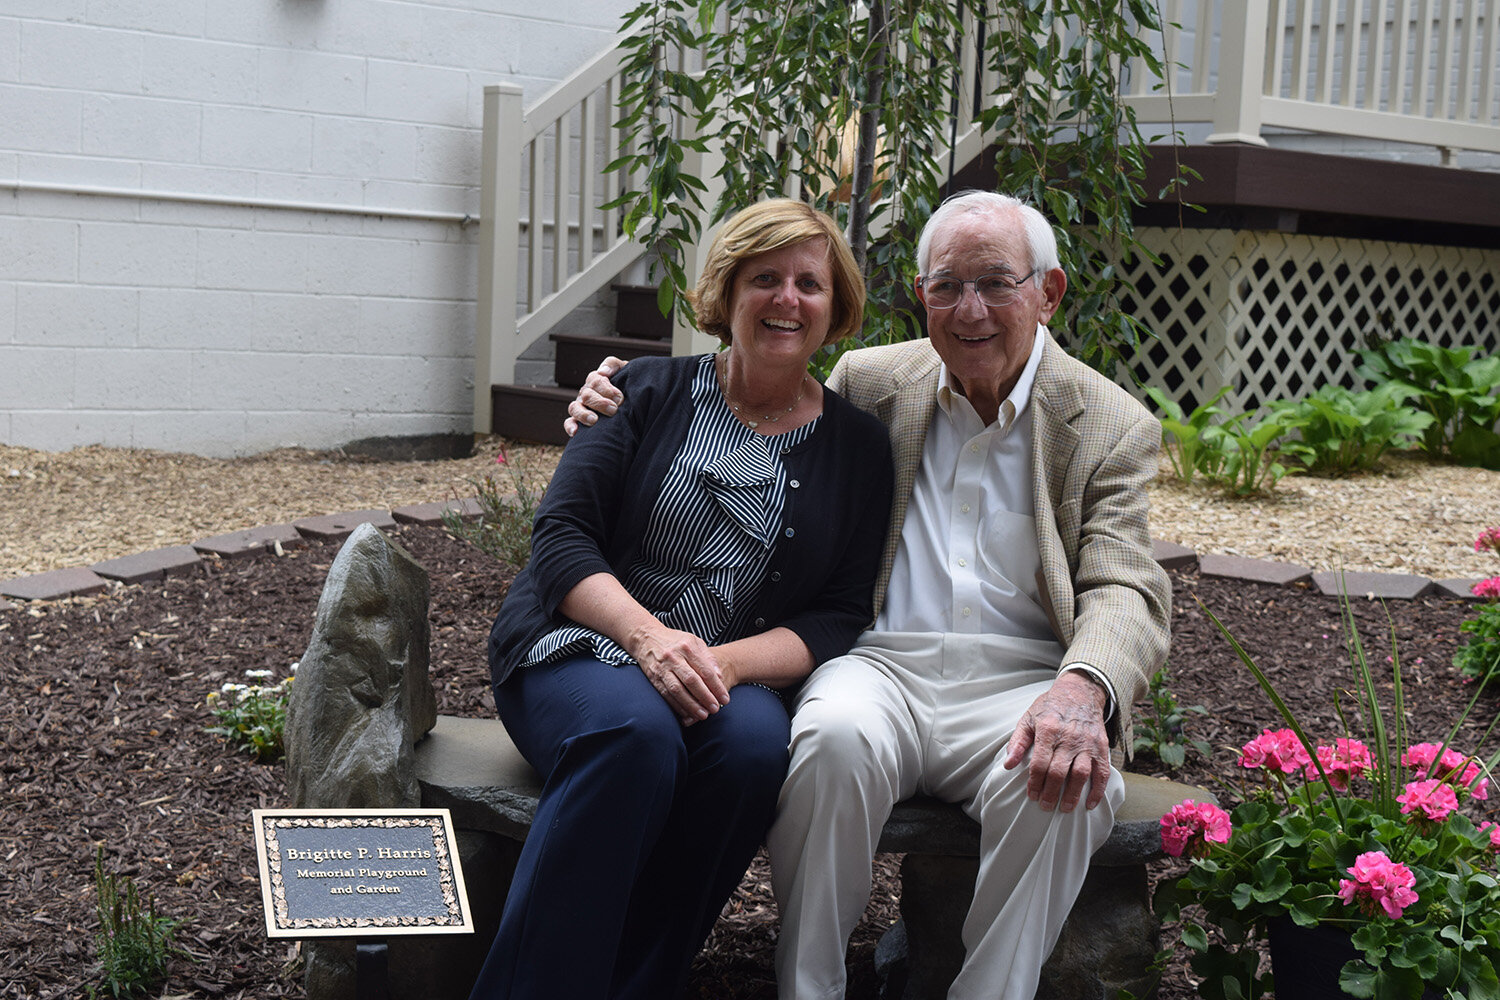  1.&nbsp;&nbsp;&nbsp;&nbsp; Brigitte Harris’ daughter and husband, Michele Becker and Mort Harris, are pictured at the 2017 dedication of the Brigitte P. Harris Memorial Playground and Garden at Oakland Family Services’ Pontiac location. 